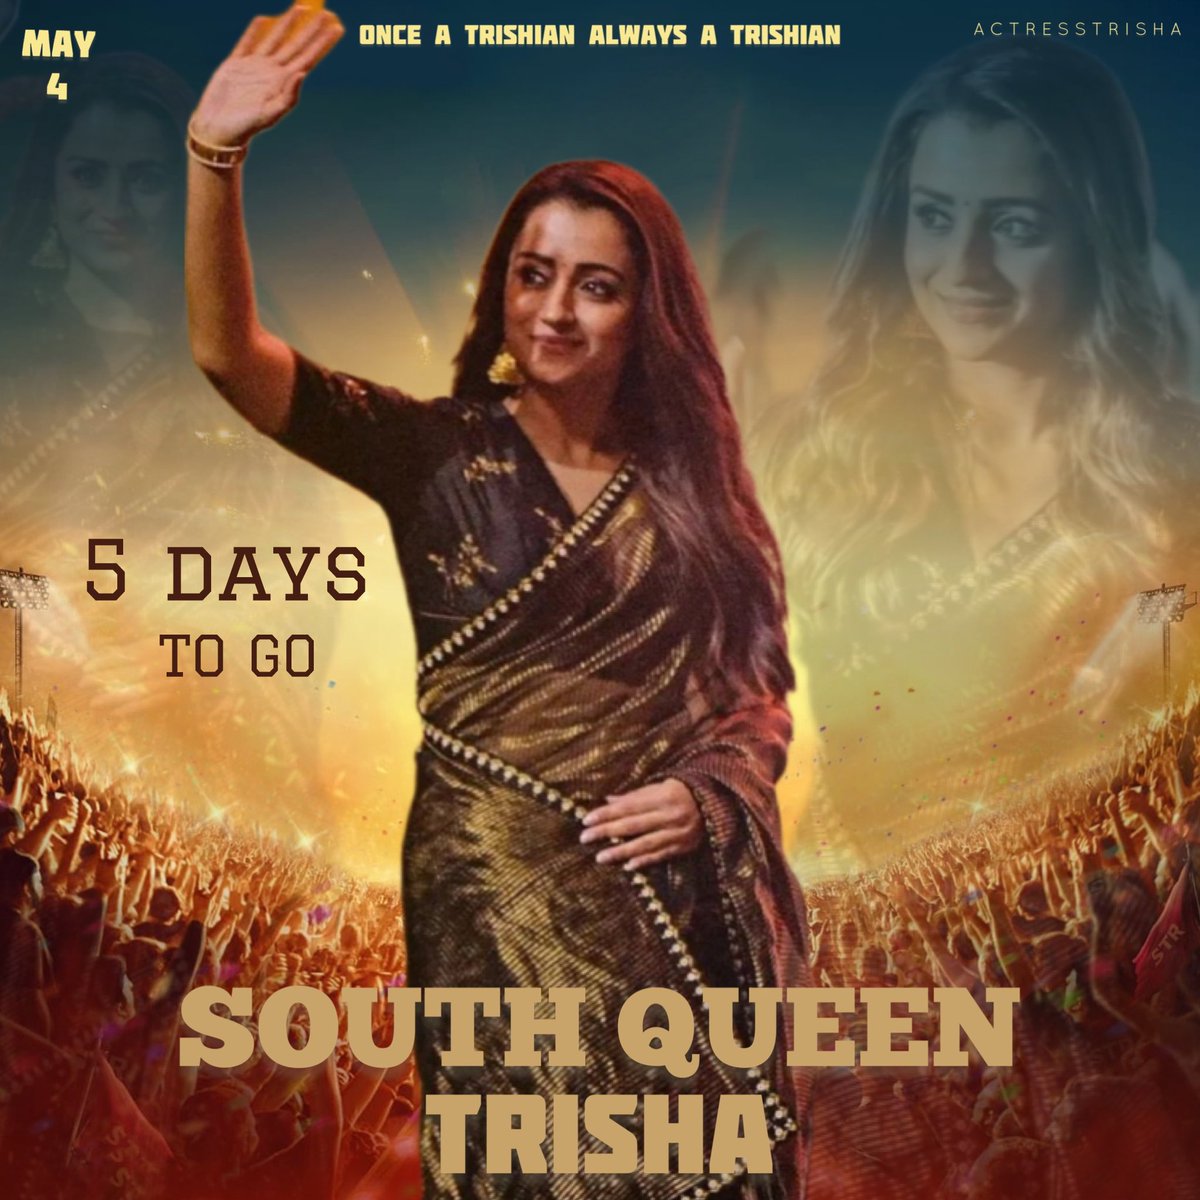 Only 5 days to go for our #SouthQueen @trishtrashers ‘s birthday 🎉

Celebrations start soon ✨
Ready #Trishians ?

Once a Trishian, Always a Trishian 

#Trisha #SouthQueenTrisha 
#AdvanceHBDSouthQueenTrisha